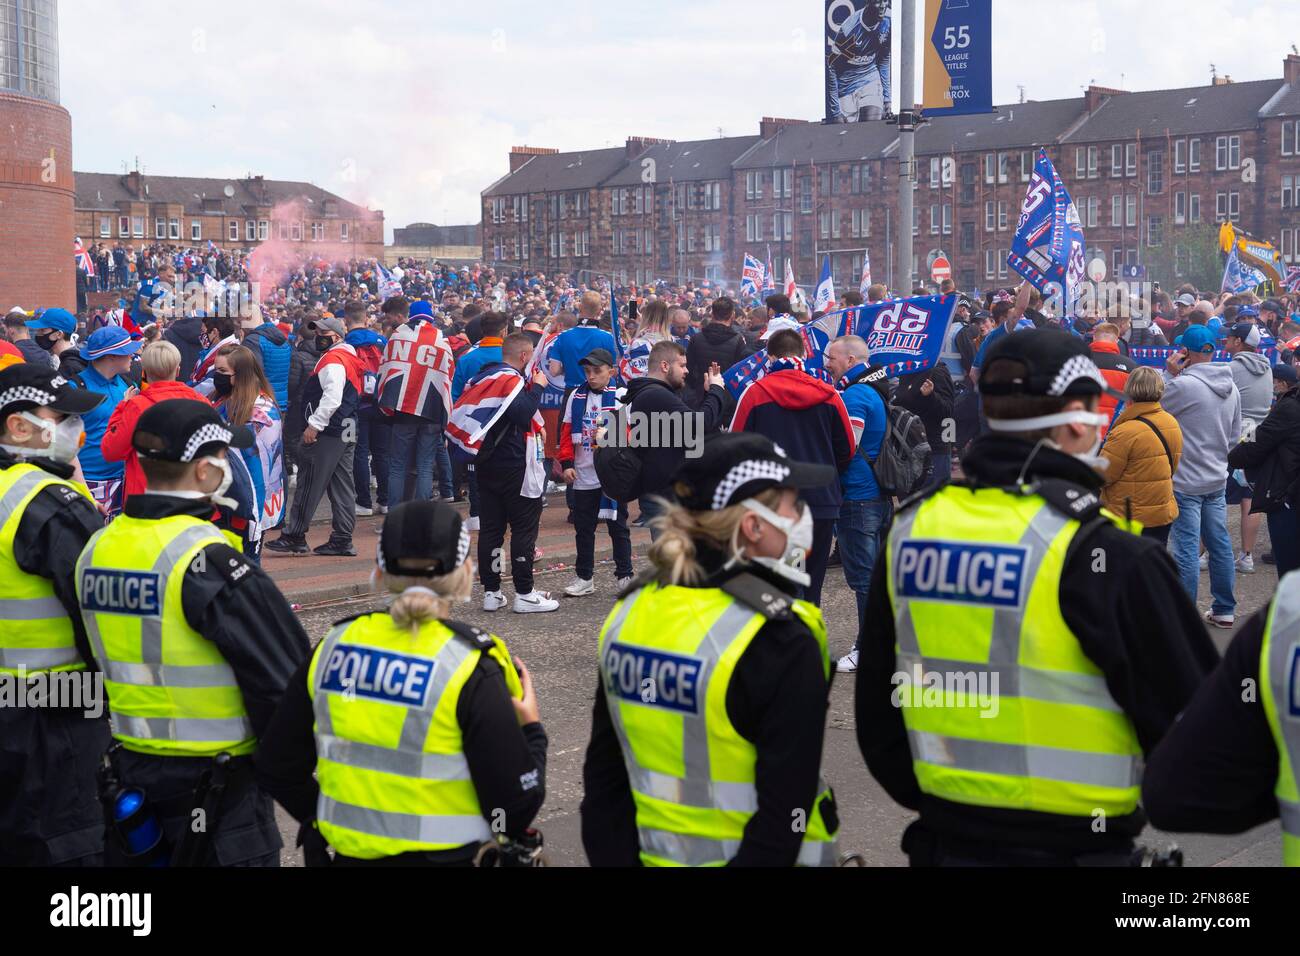 Glasgow, Scotland, UK. 15 May 2021. Hundreds of supporters and fans of Rangers football club descend on Ibrox Park in Glasgow to celebrate winning the Scottish Premiership championship. Smoke bombs and fireworks are being let off by fans tightly controlled by police away from the stadium entrances.Iain Masterton/Alamy Live News Stock Photo